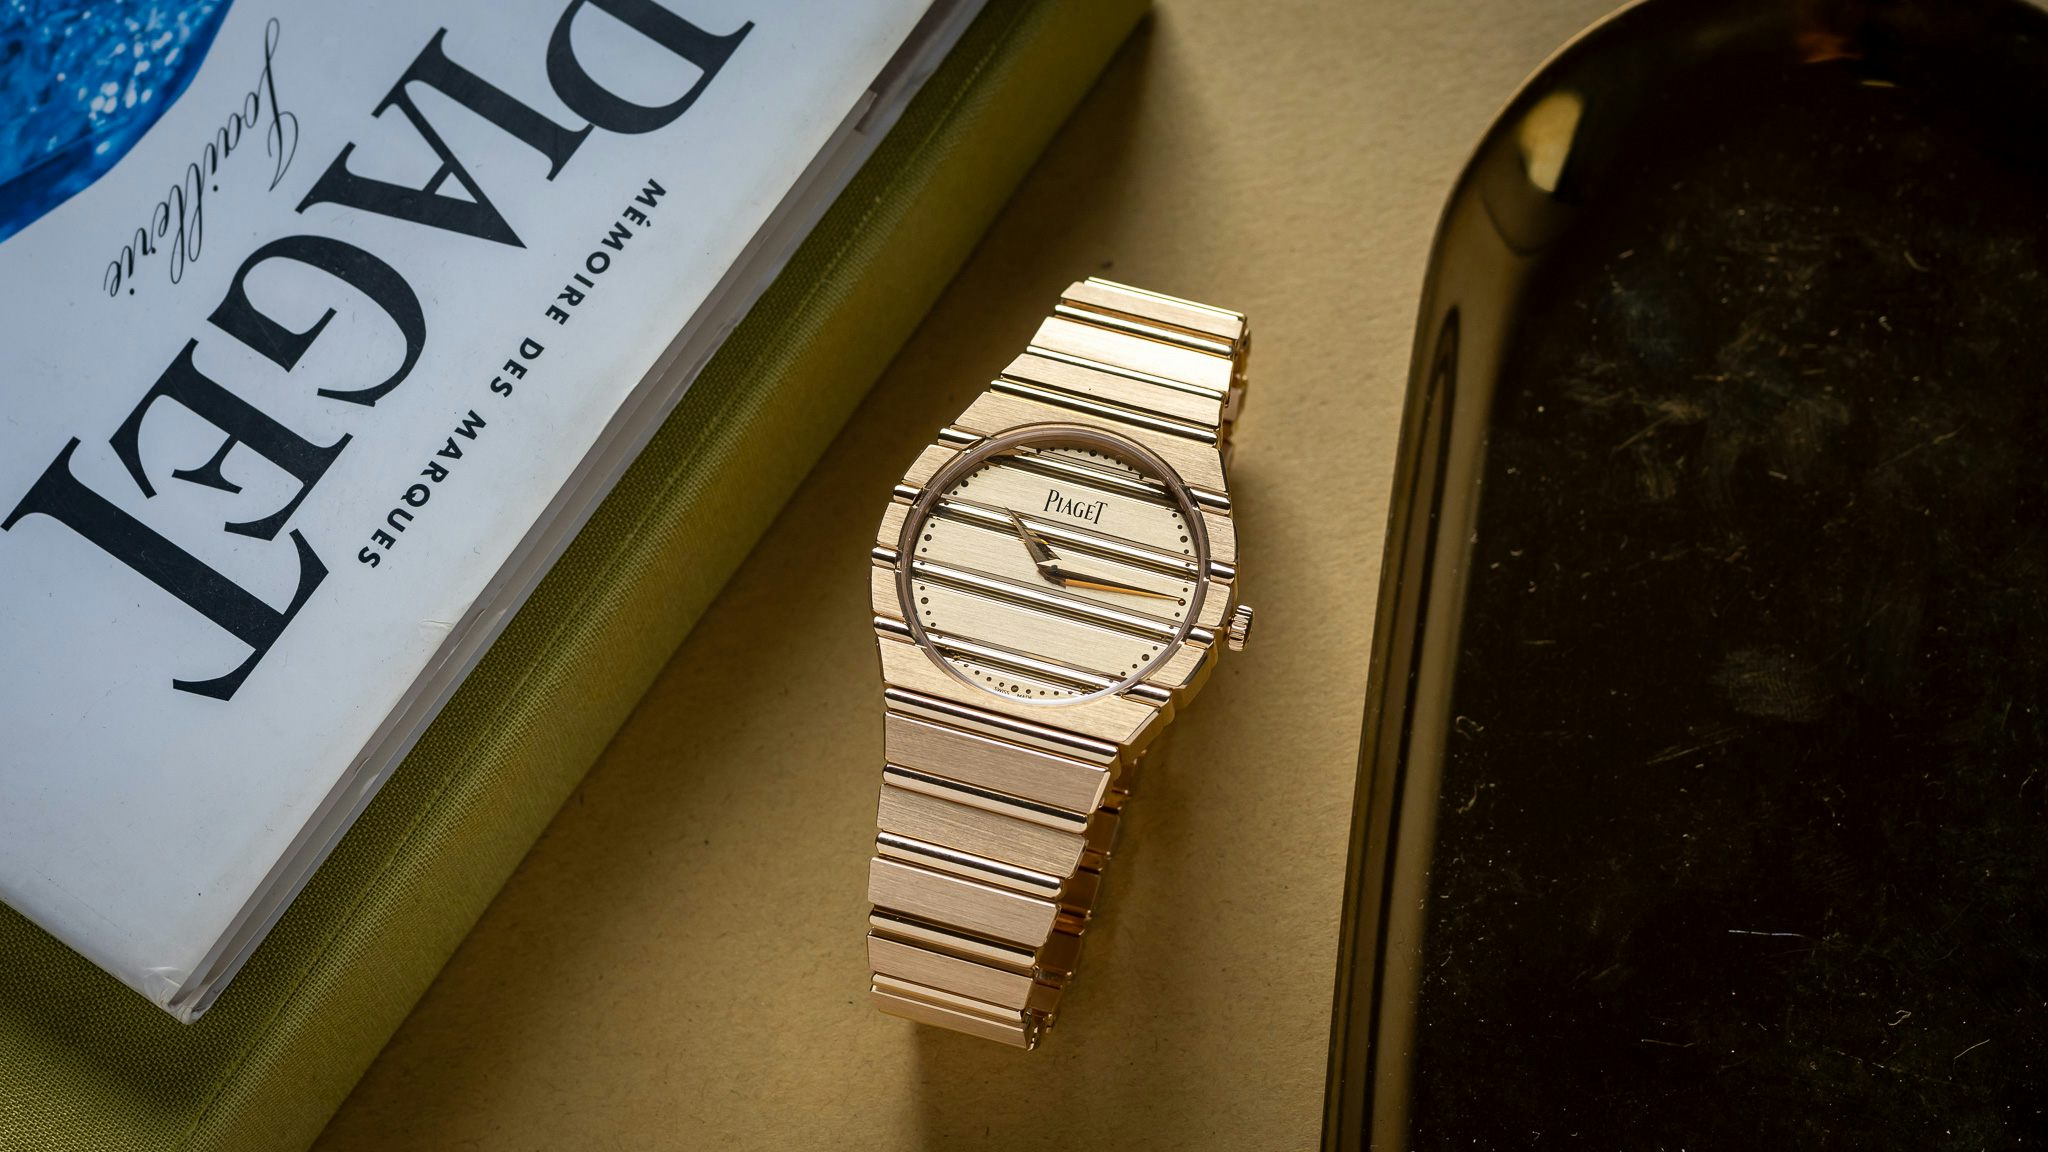 Introducing The Piaget Polo79, A Revival Of The Original Polo